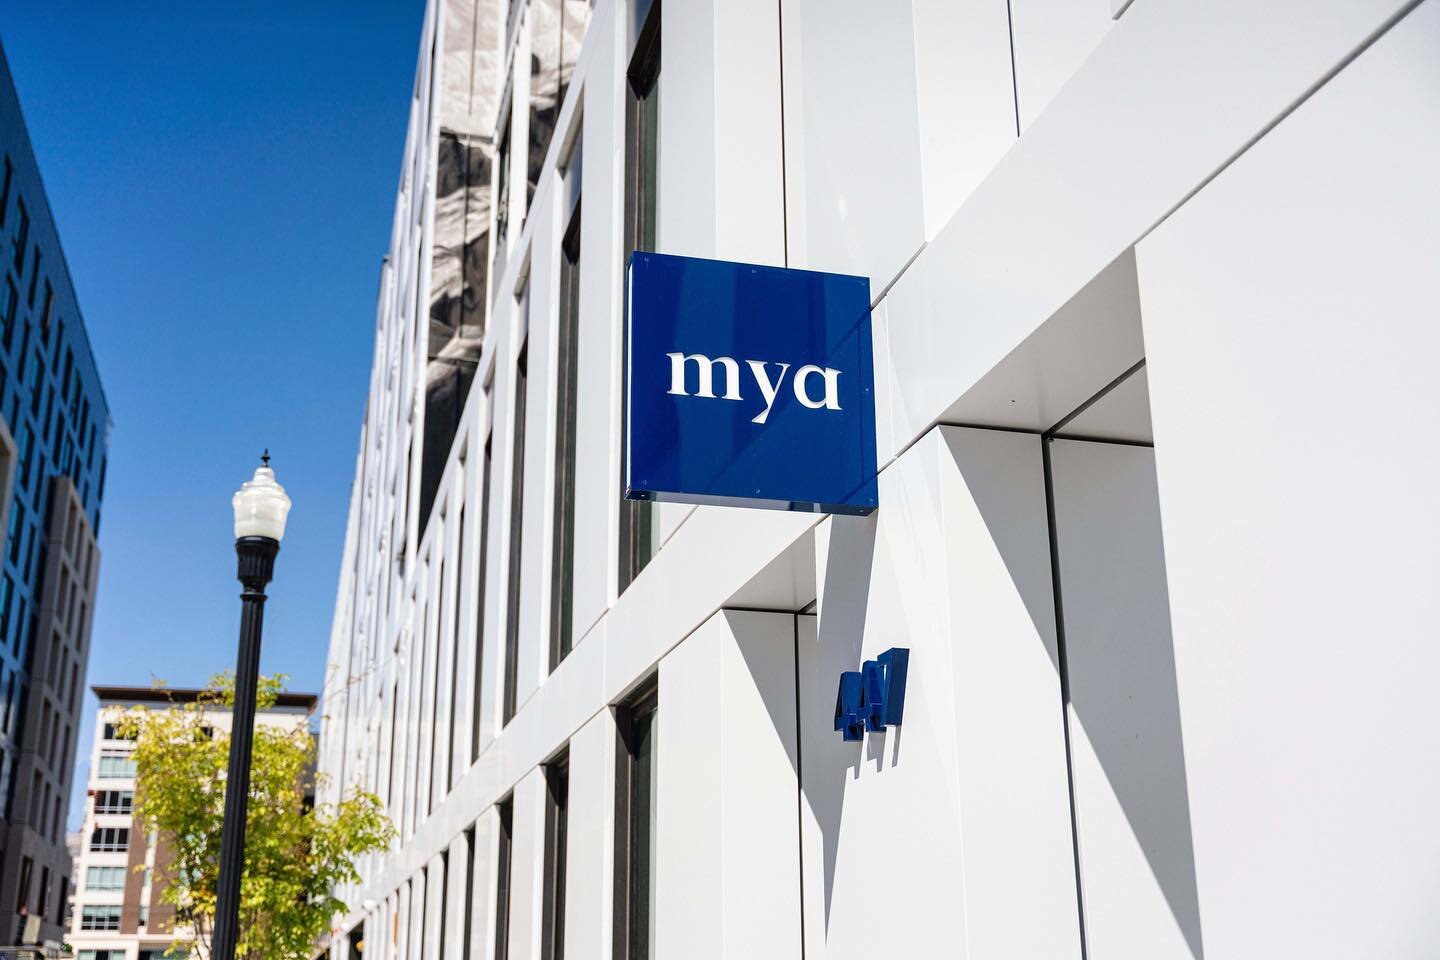 #ThrowbackThursday 
It&rsquo;s been 1 year since the completion of MYA, this unique building located in downtown Salt Lake City provides affordable housing and an urban lifestyle. 

#WadmanBuilds #OneYear #Affordable #DowntownSLC #MYALiving #PinkFloy